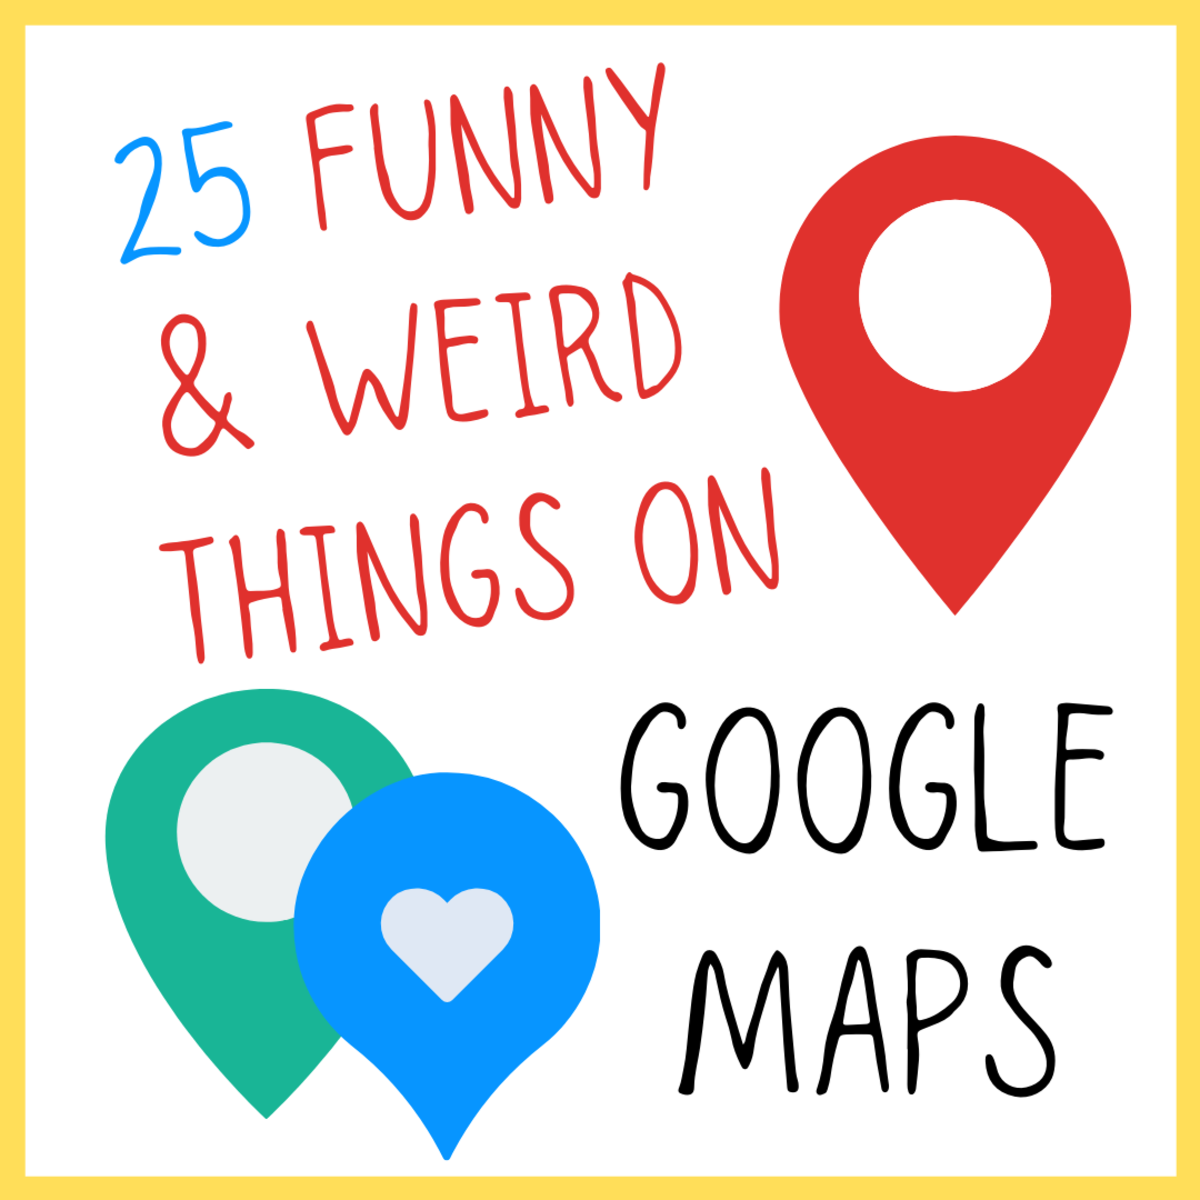 25 Funny Things on Google Maps